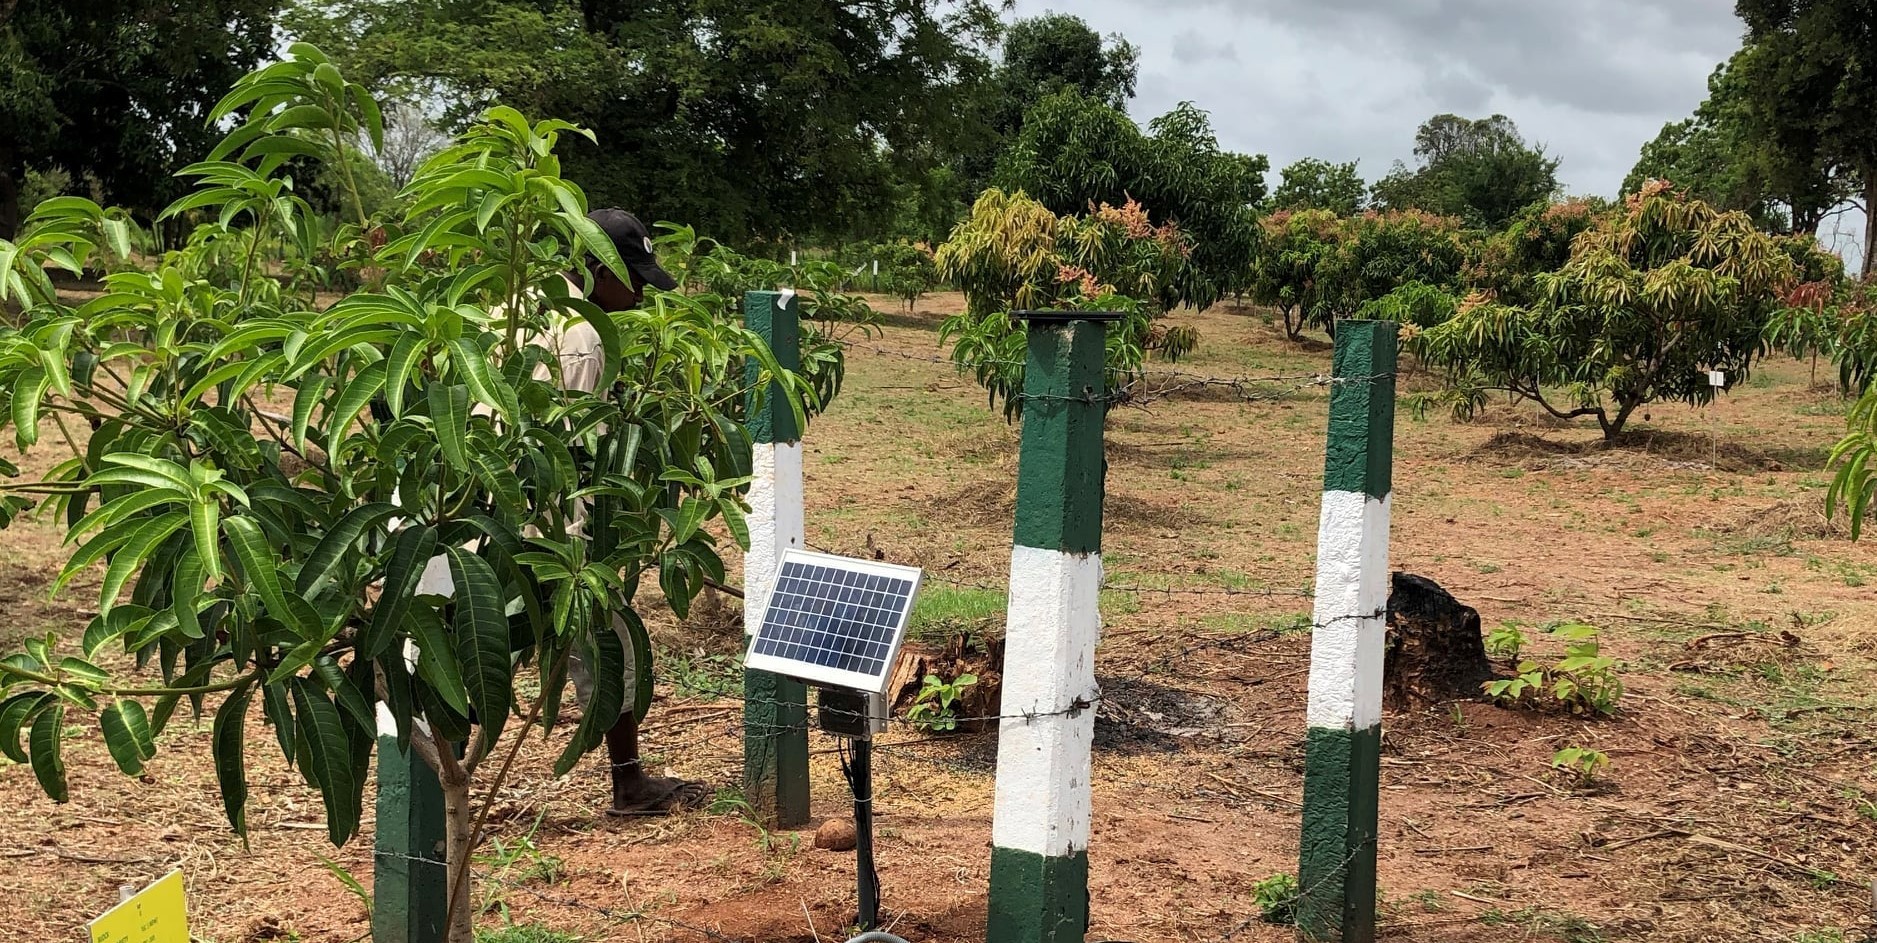 Evaluation of real-time climatic strategy for the effect of the water stress on the productivity of Mangifera indica by digital monitoring